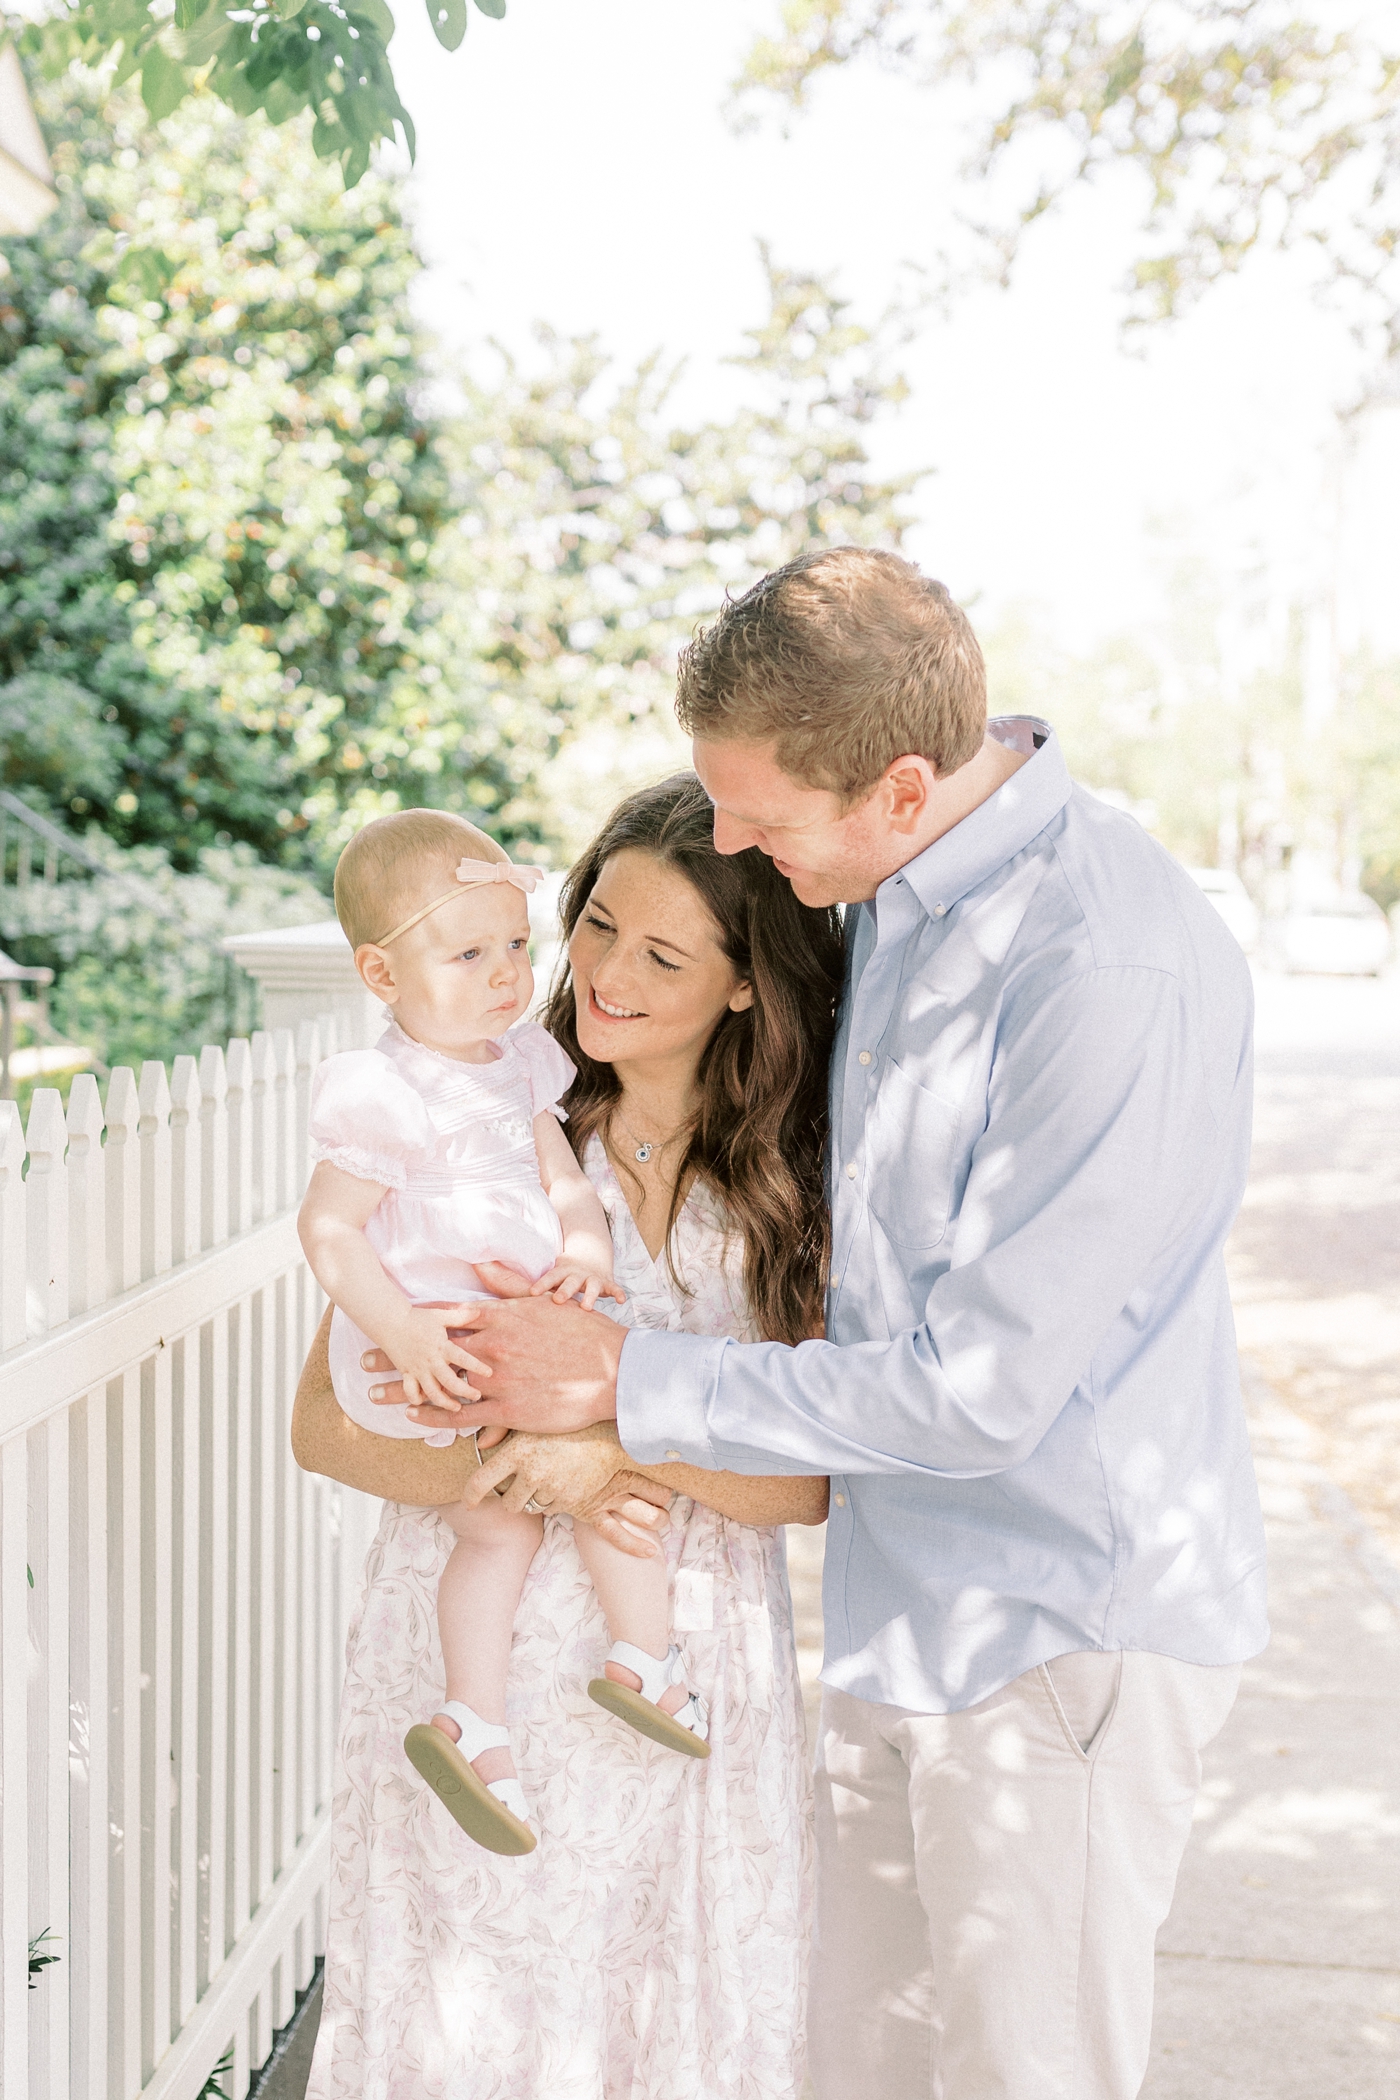 Family snuggled together during family photo session | Photo by Caitlyn Motycka Photography.